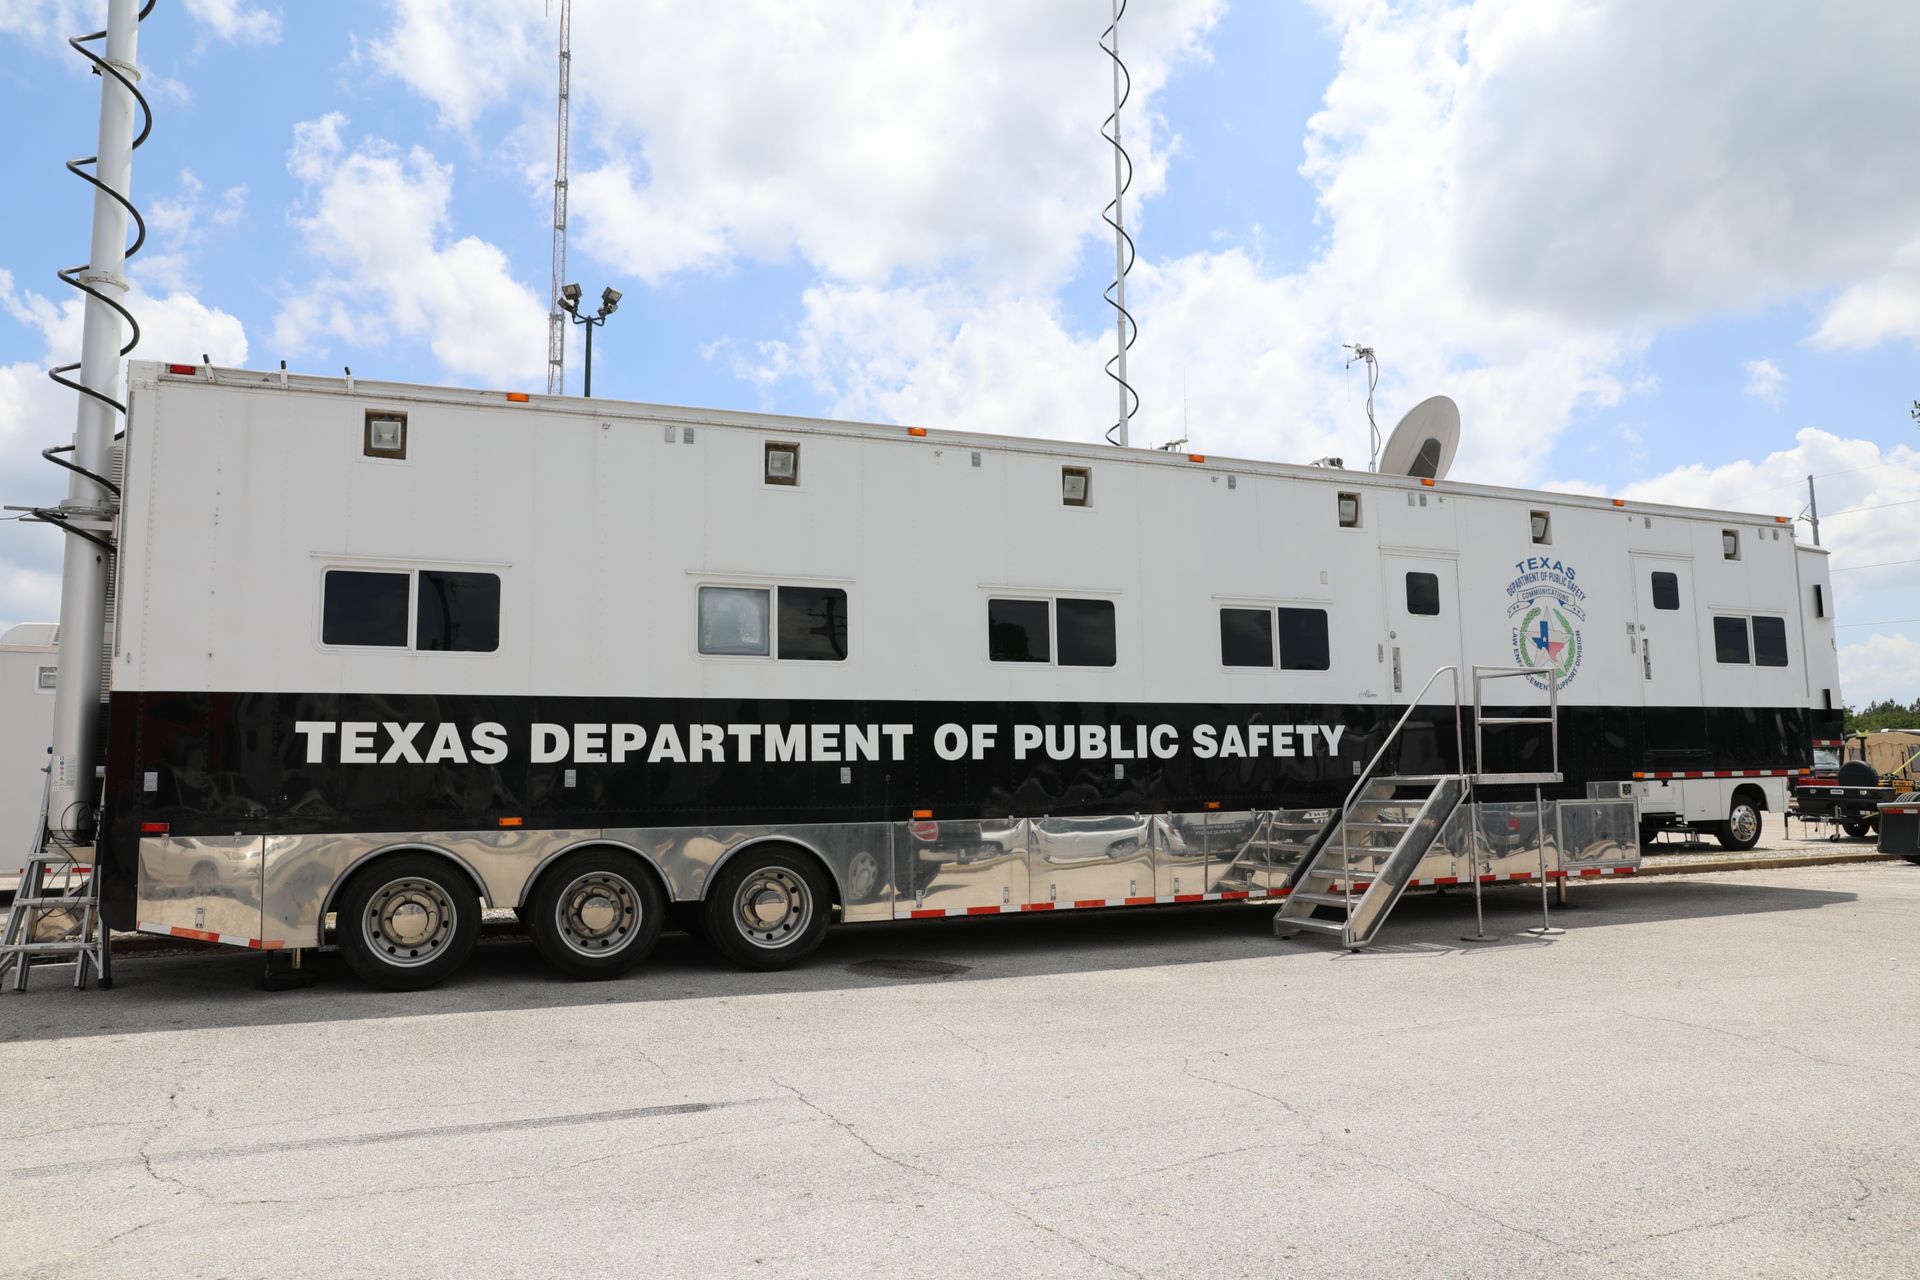 Large black and white trailer used for emergency management